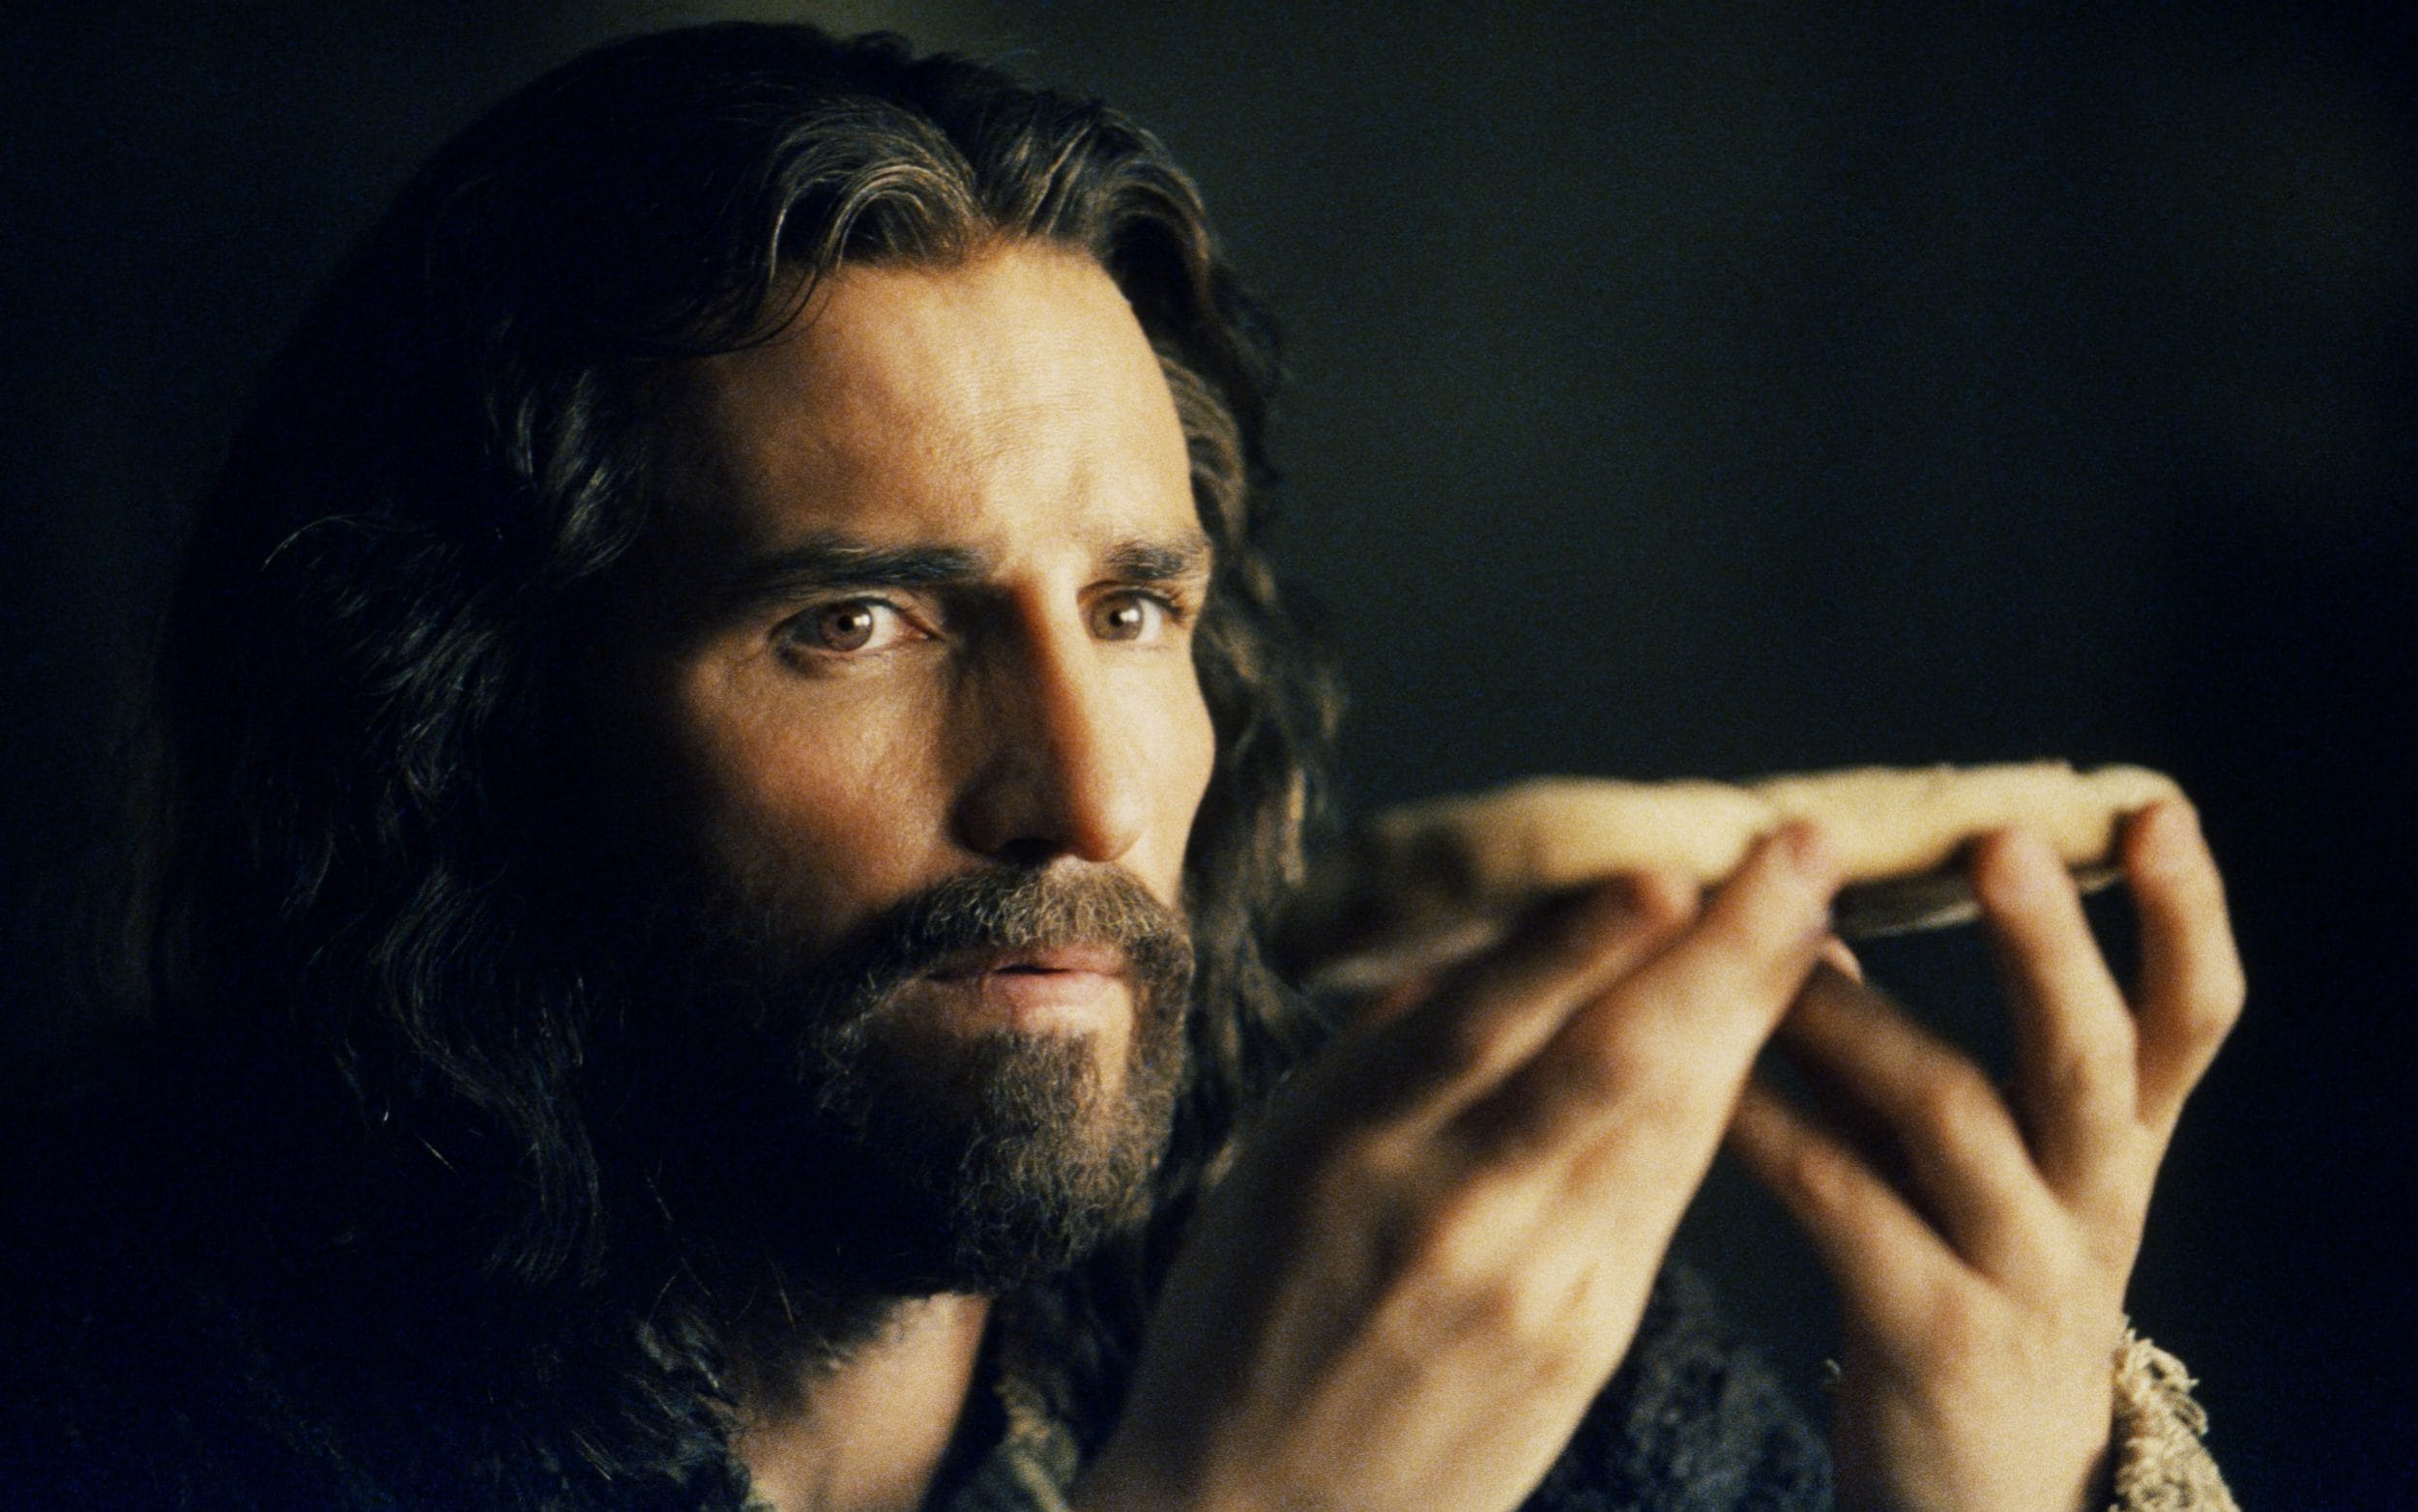 the passion of christ full movie in english